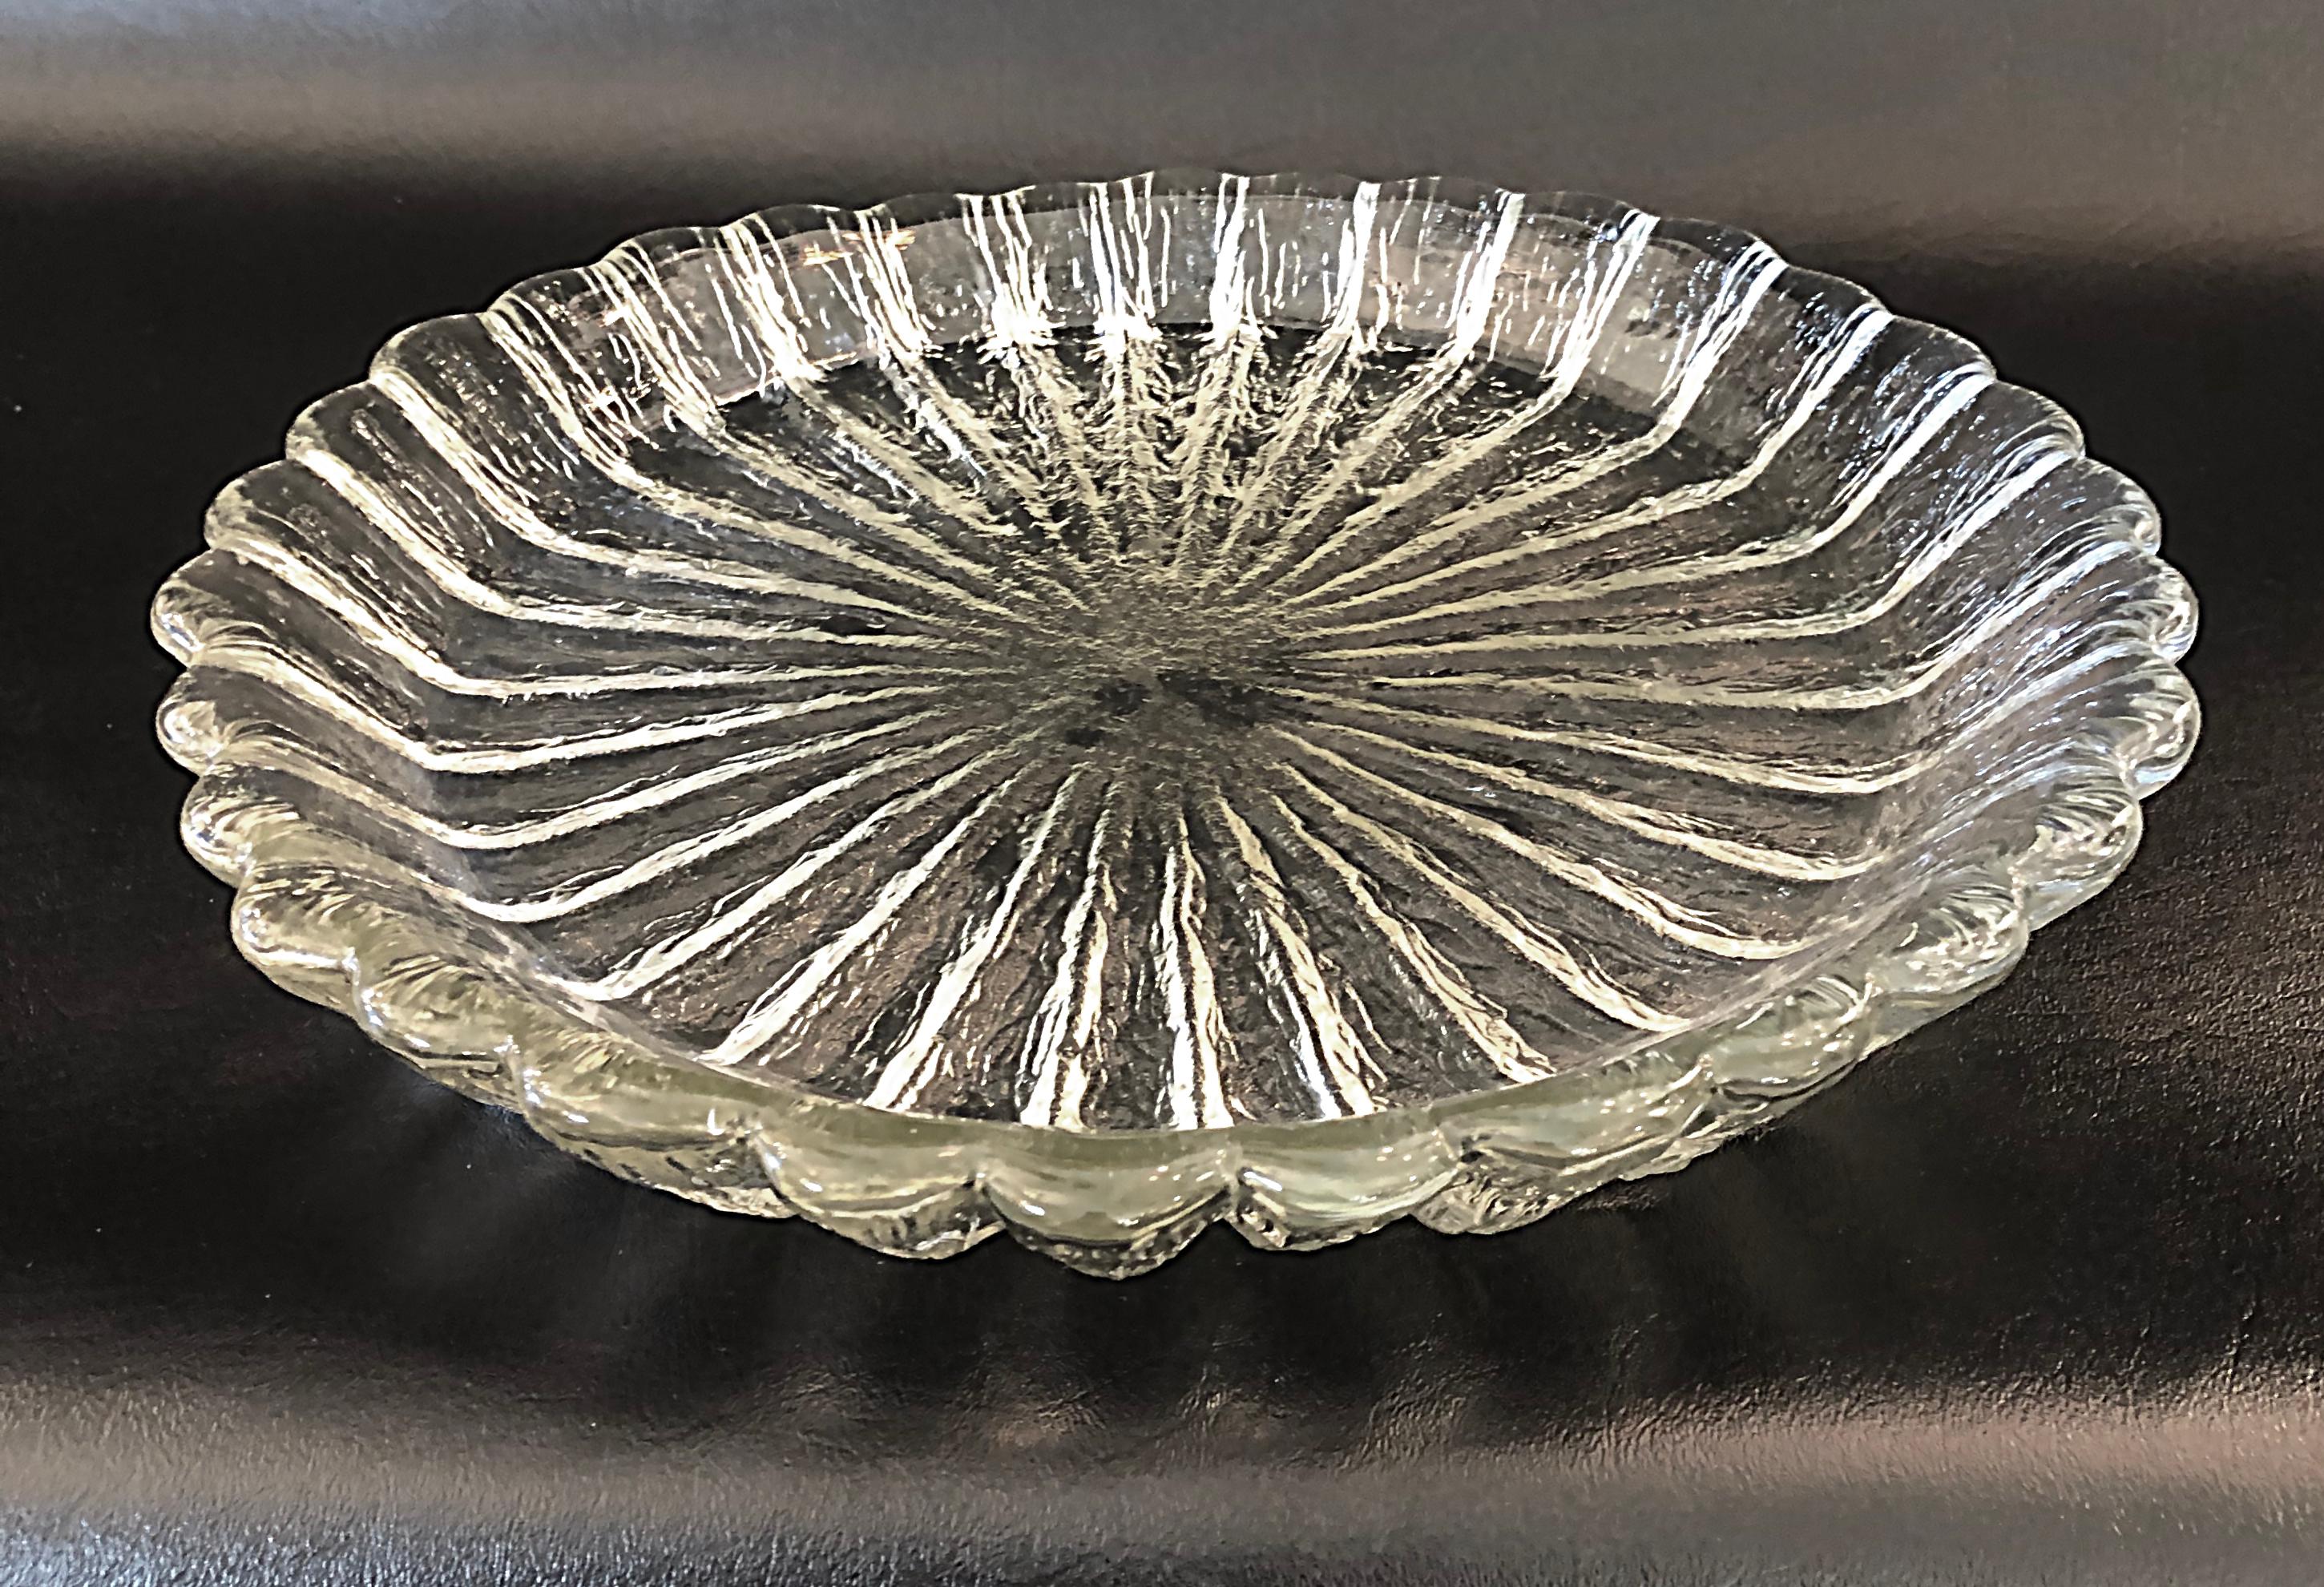 Danish Modern Lead Crystal Centerpiece Bowl by Sidse Werner for Holmegaard Glass In Good Condition For Sale In Miami, FL